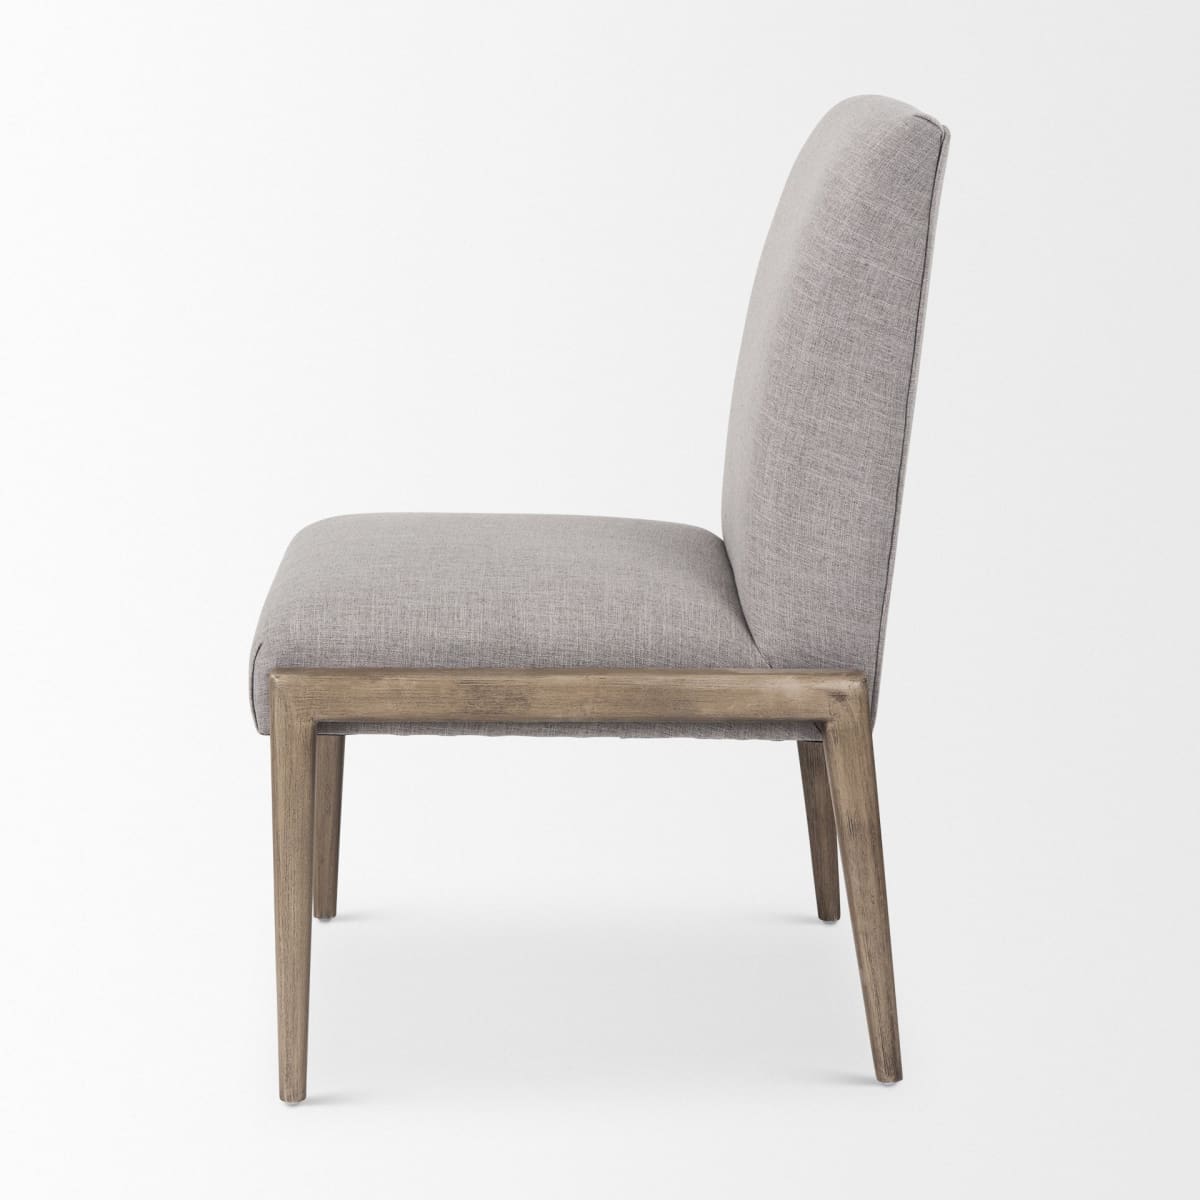 Palisades Dining Chair Gray | Brown Wood - dining-chairs